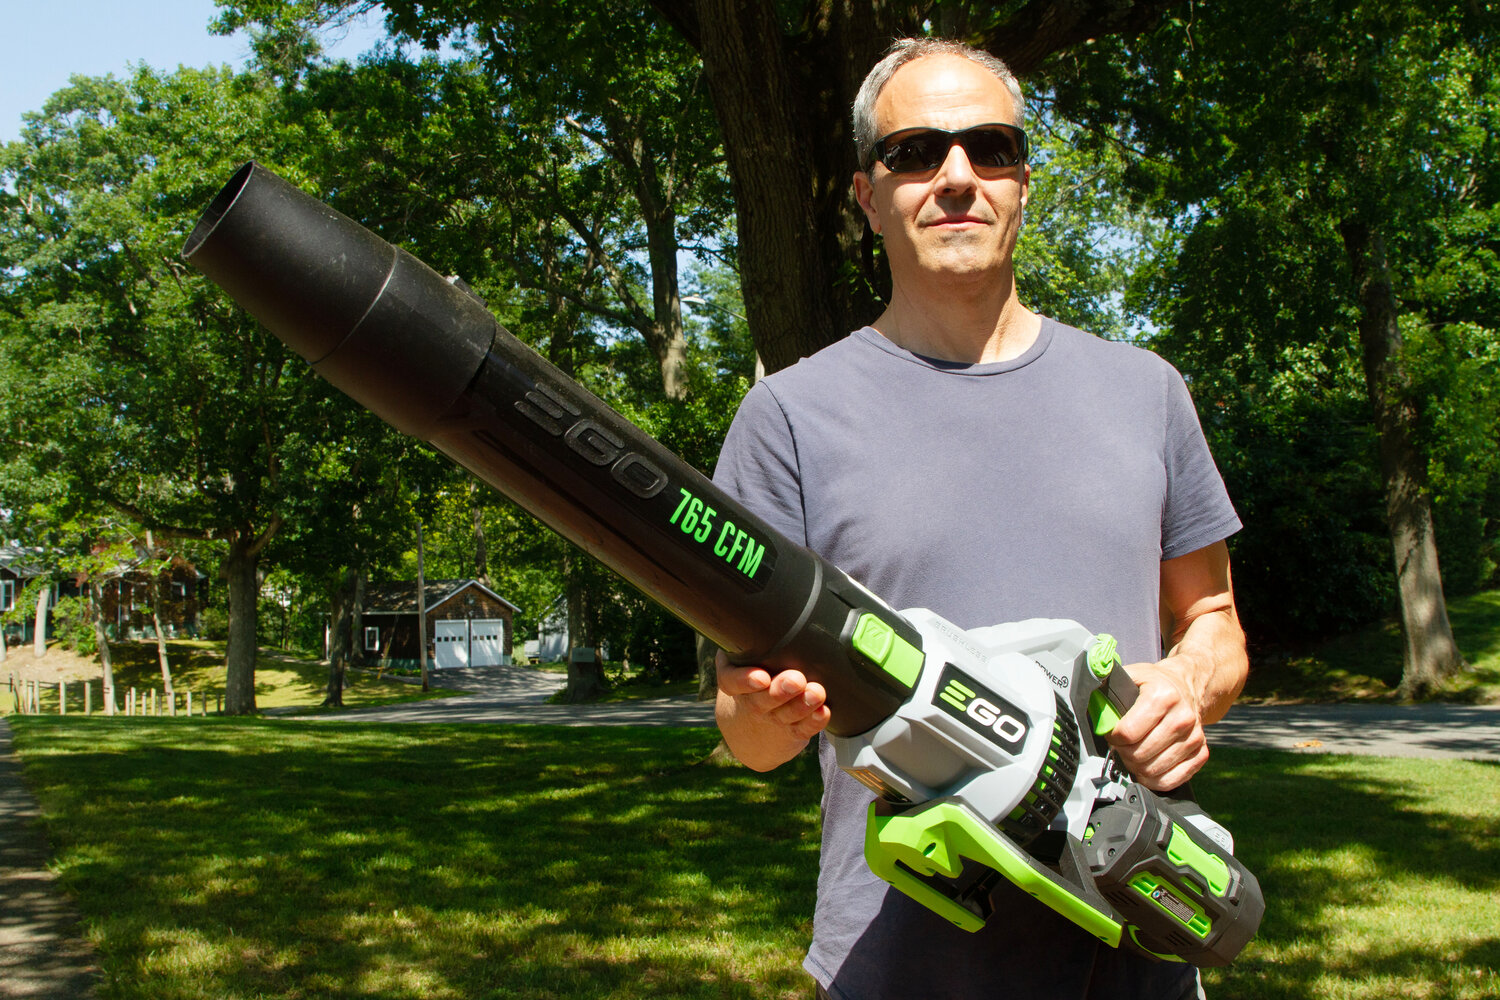 Resident Aims To Eliminate Gas powered Leaf Blowers EastBayRI 